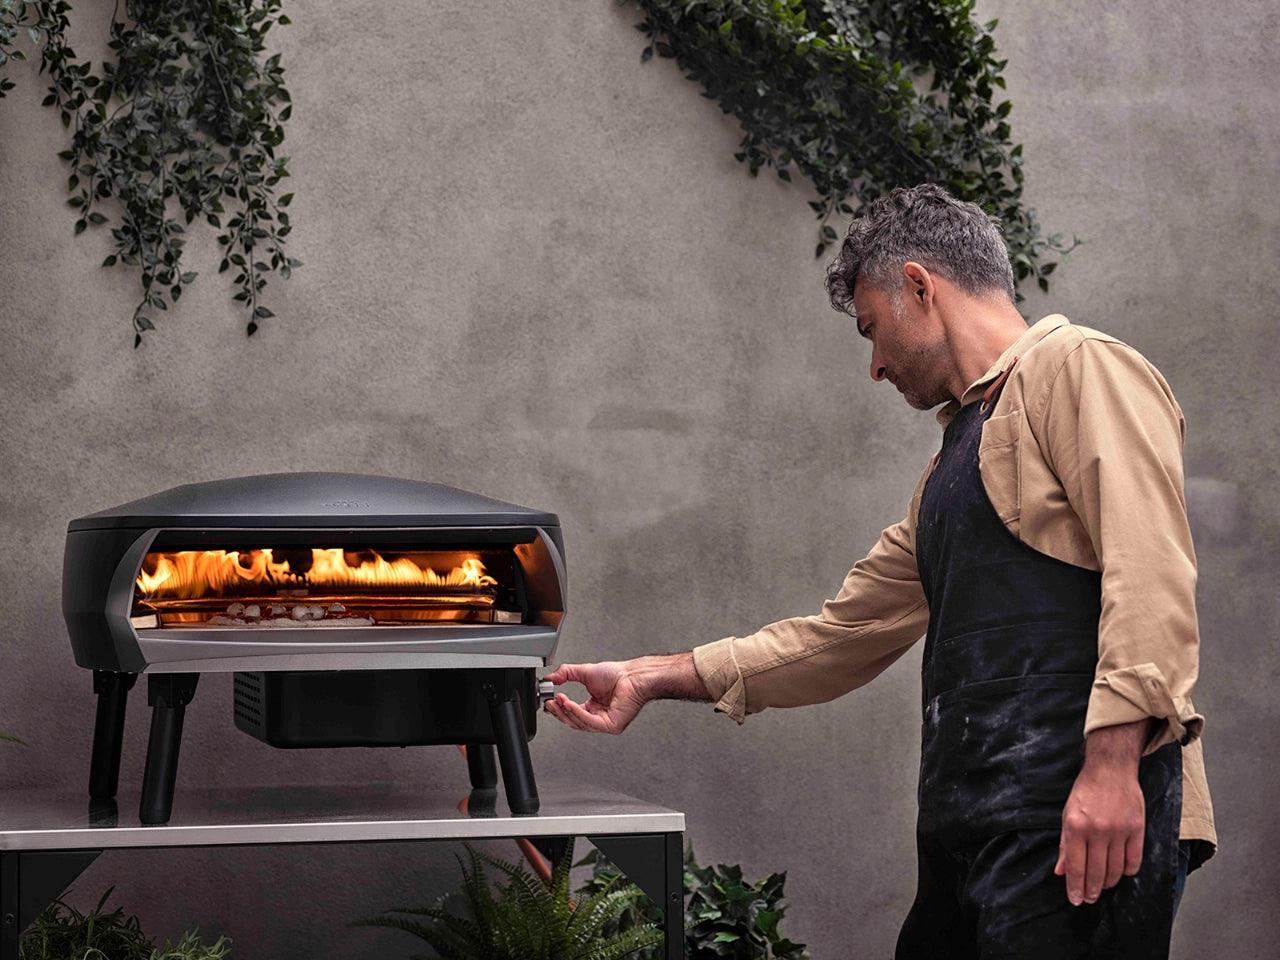 Witt Etna Rotante Pizza Oven with Rotating Stone